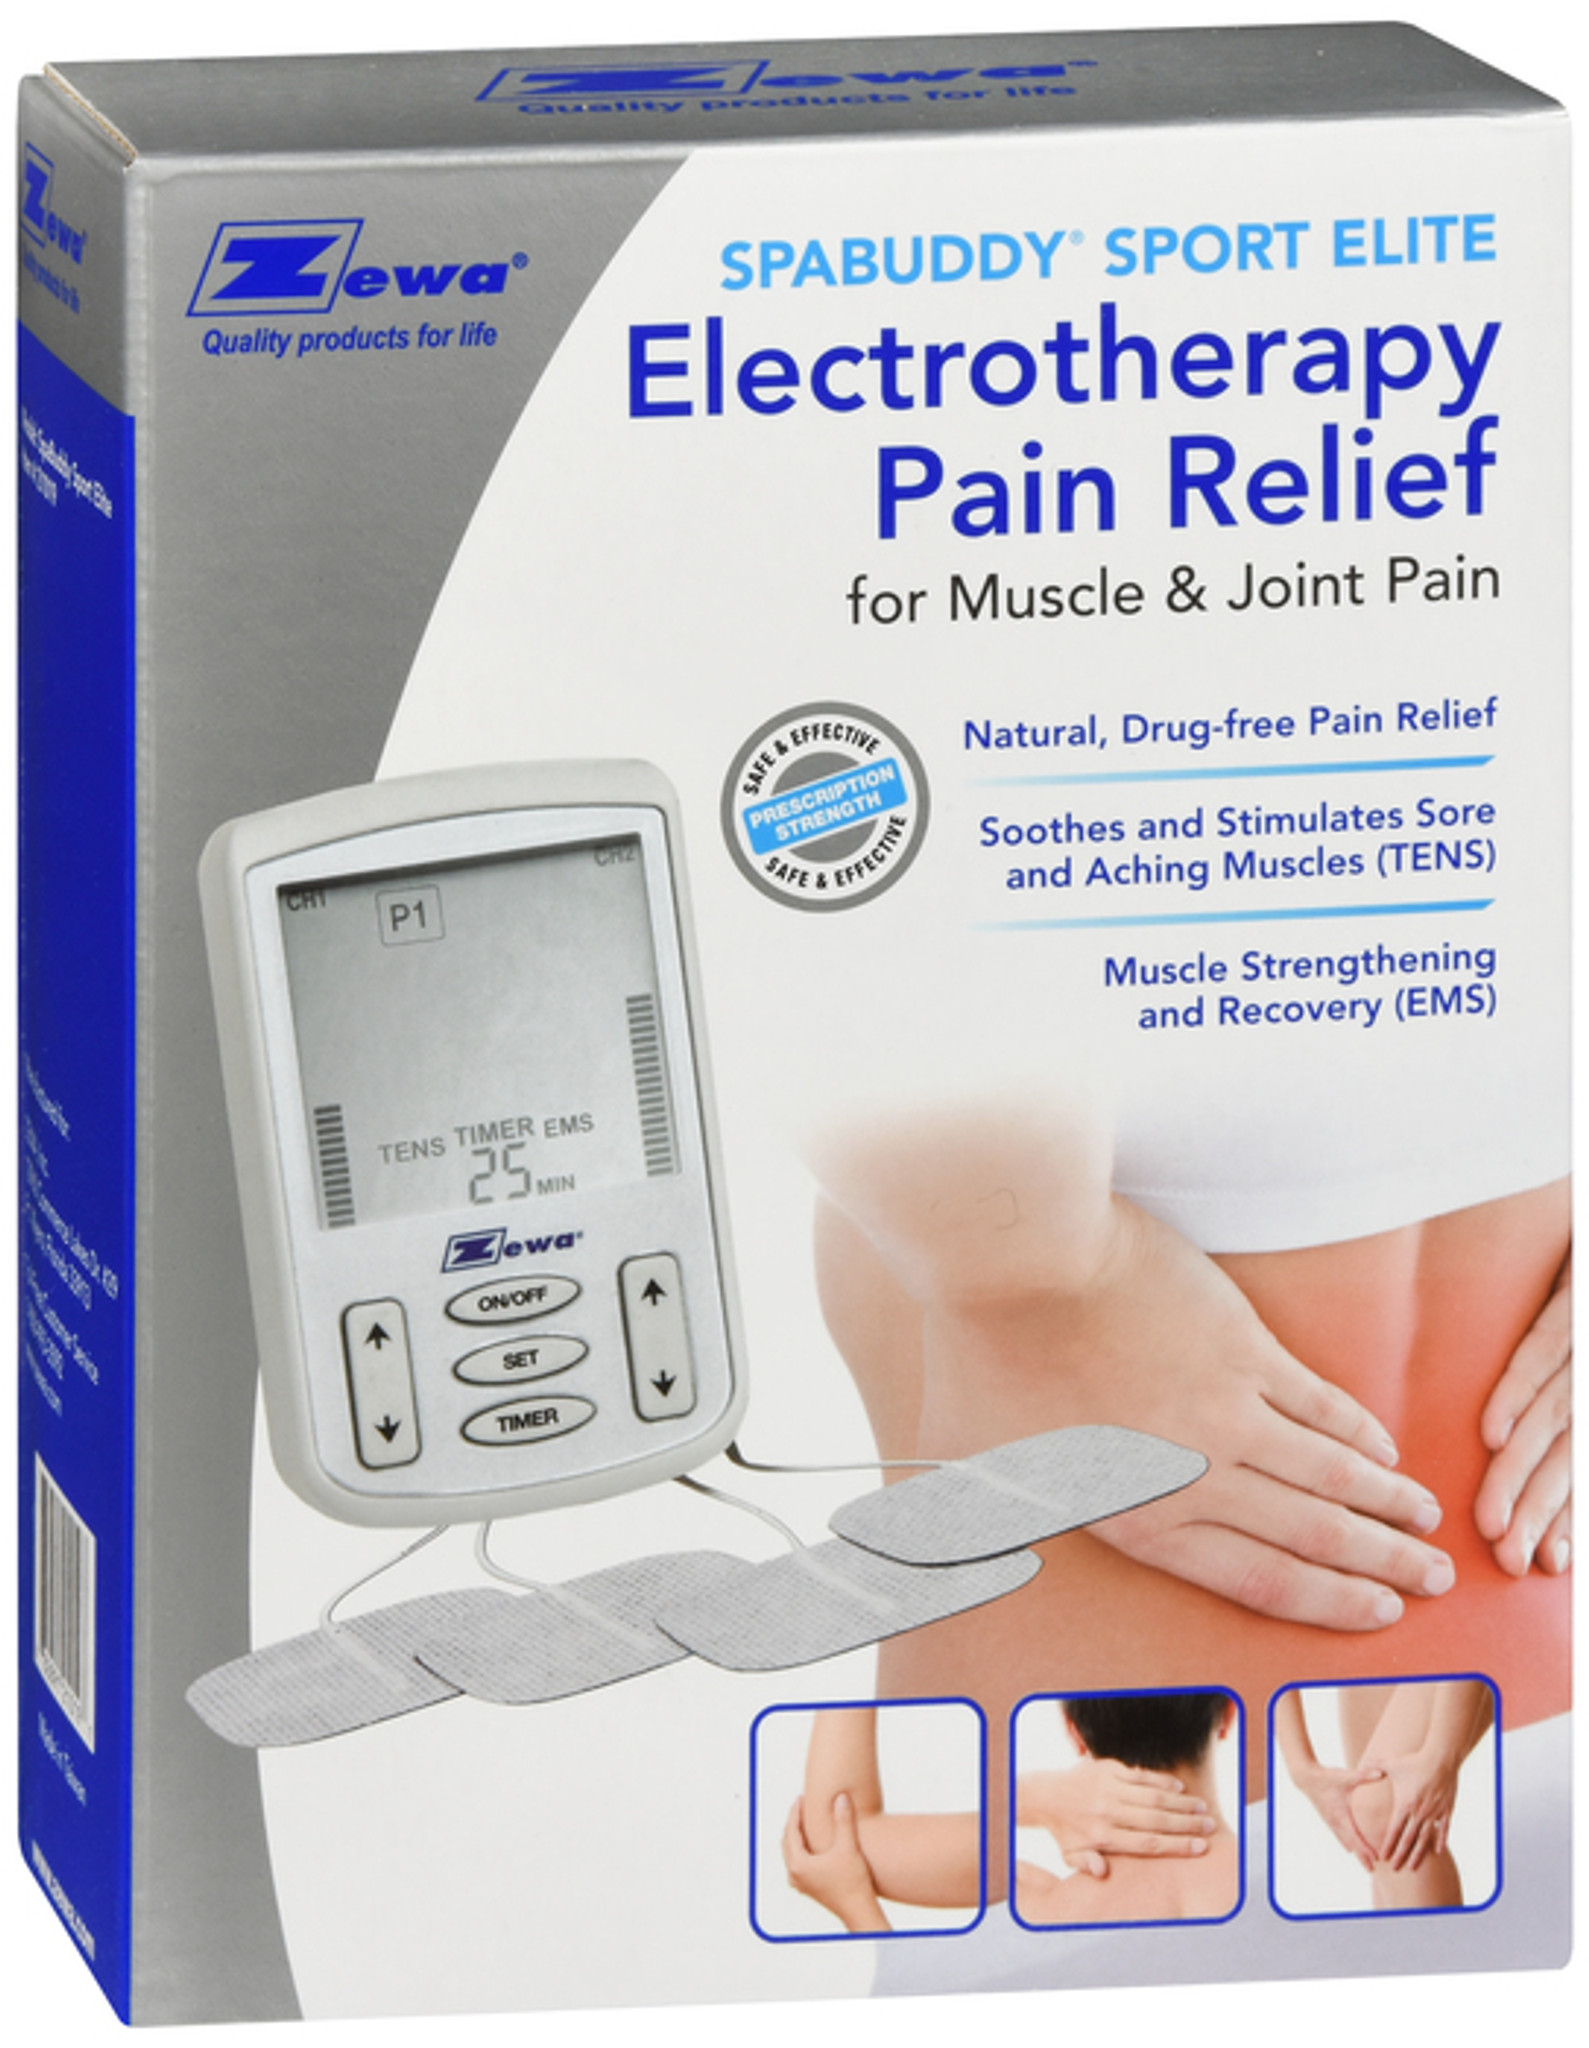 Sensiv Full-Body TENS Pain Relief Therapy with Foot Attachment